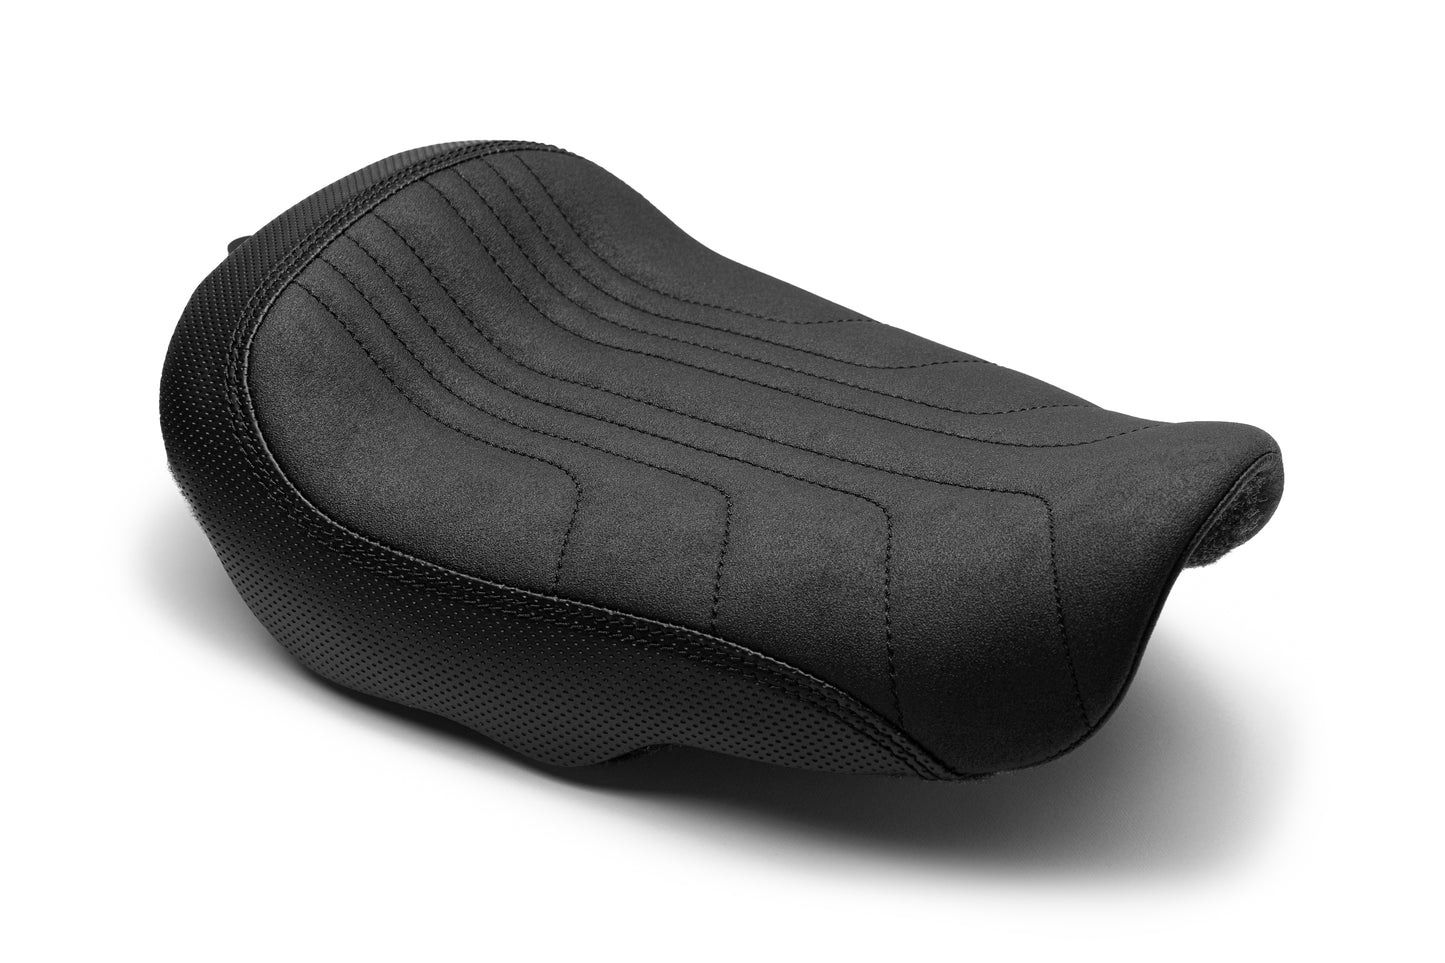 2021-Later Sportster S "Sporty" Seat